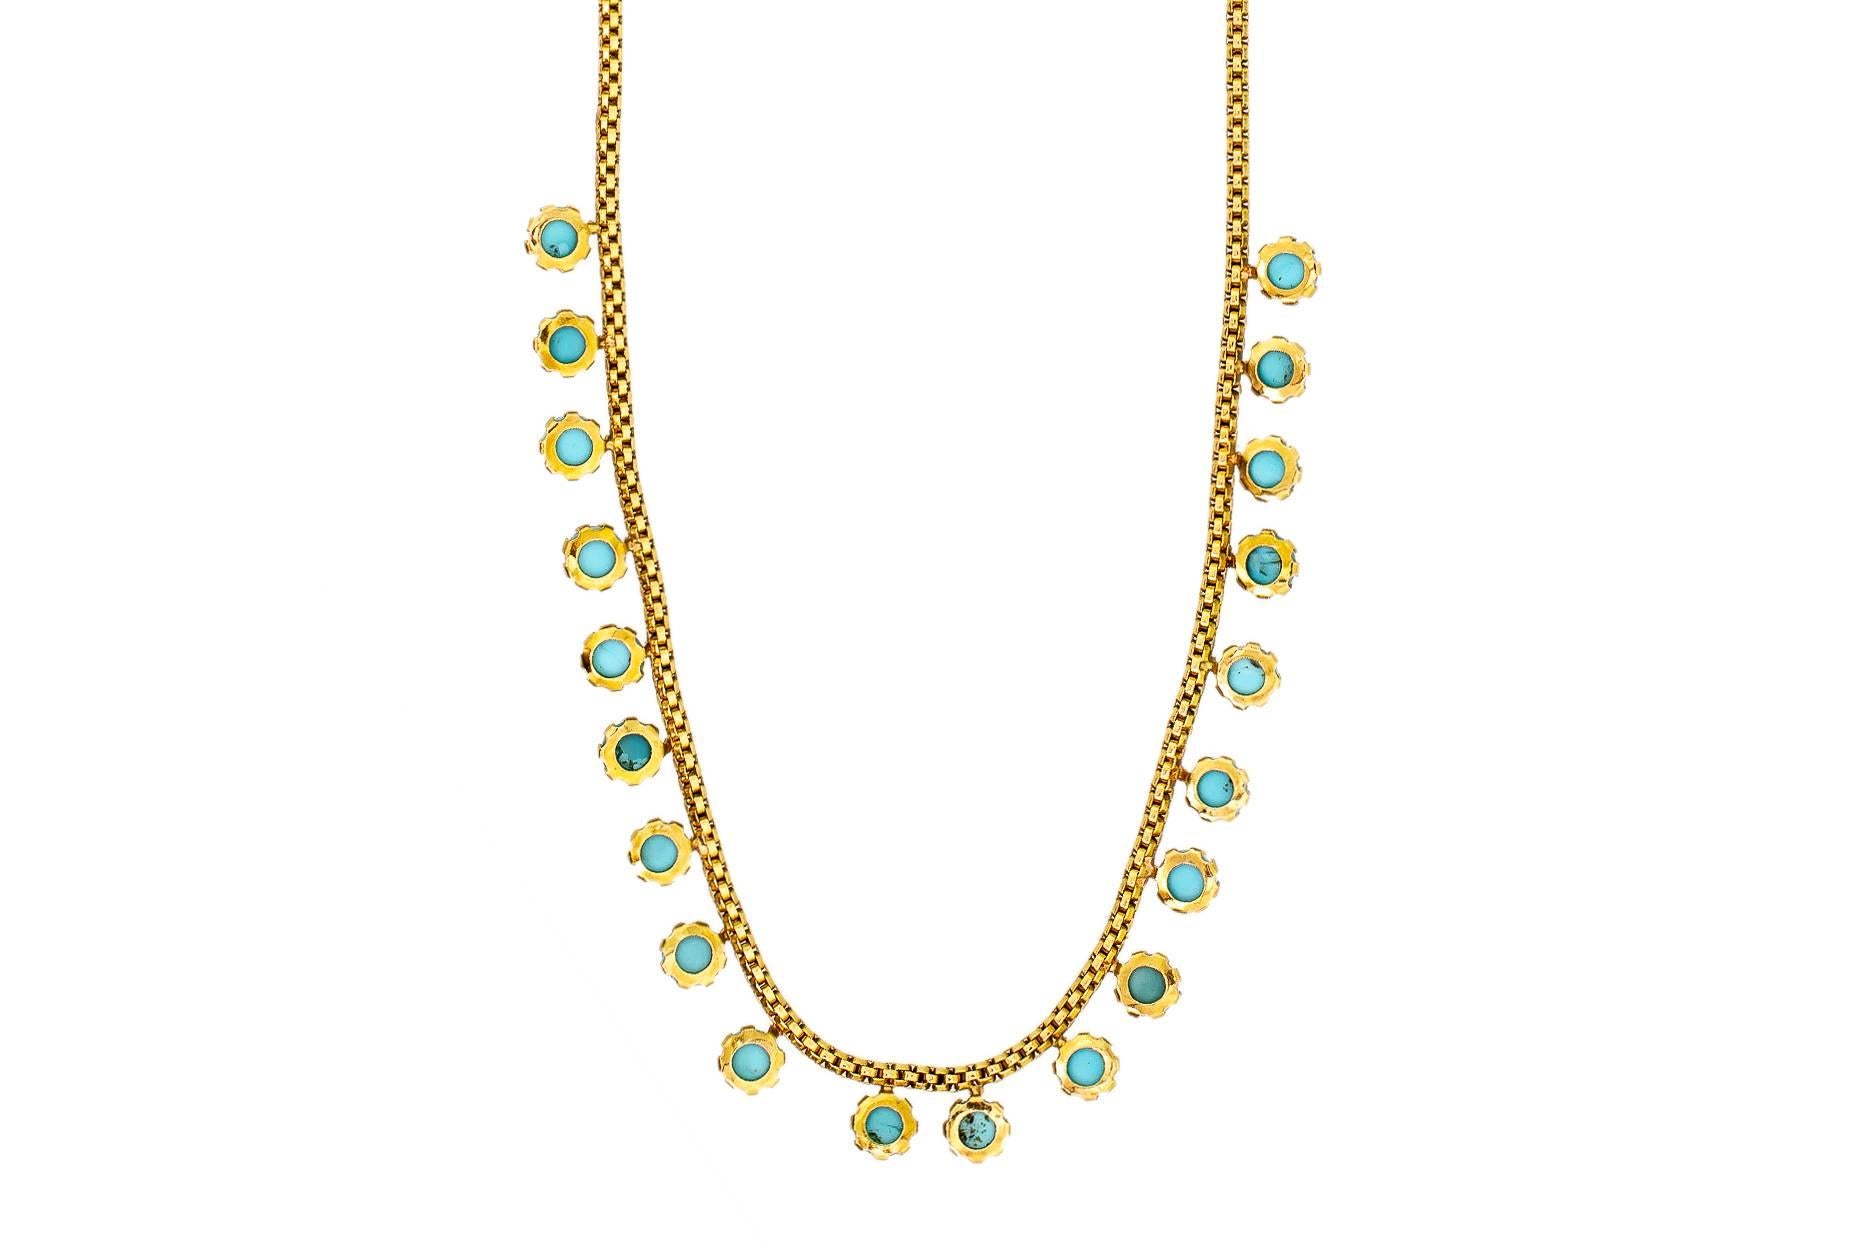 Wonderful Turn of the Century Antique Turquoise and 18 Karat Gold Necklace 2